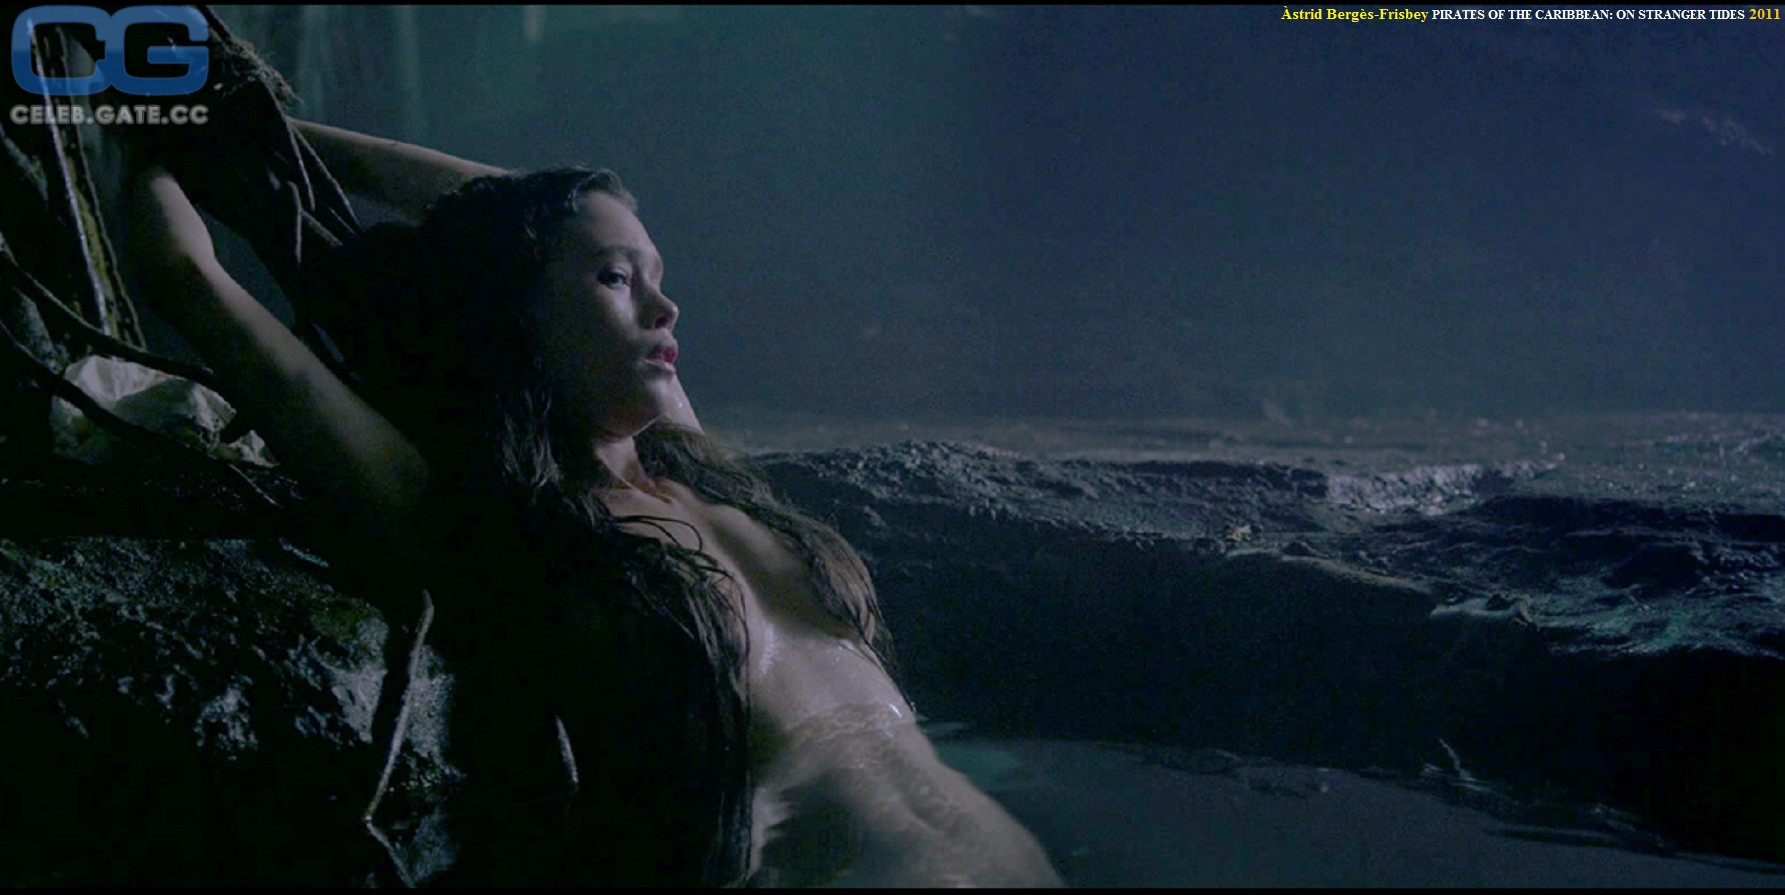 Nude astrid berges-frisbey WATCH: Astrid